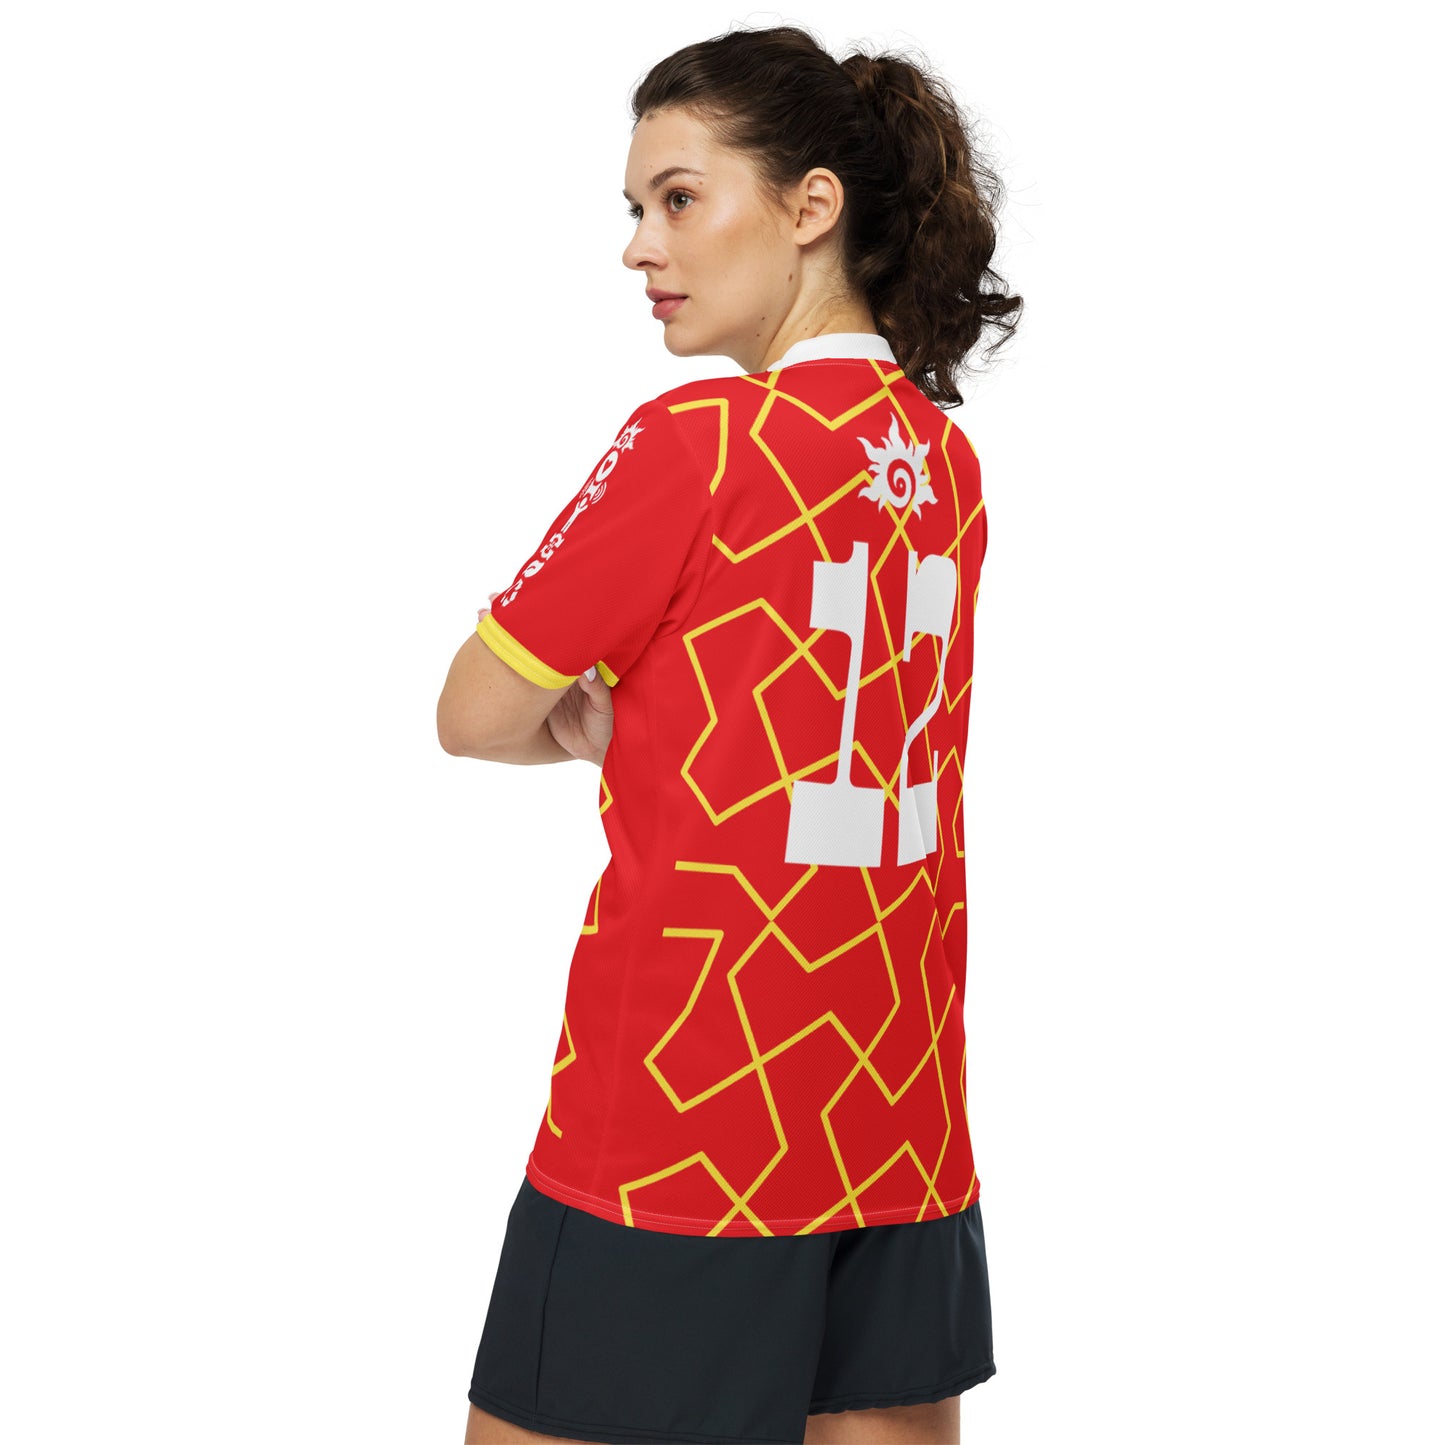 Recycled Unisex Sports jersey ActSun 12